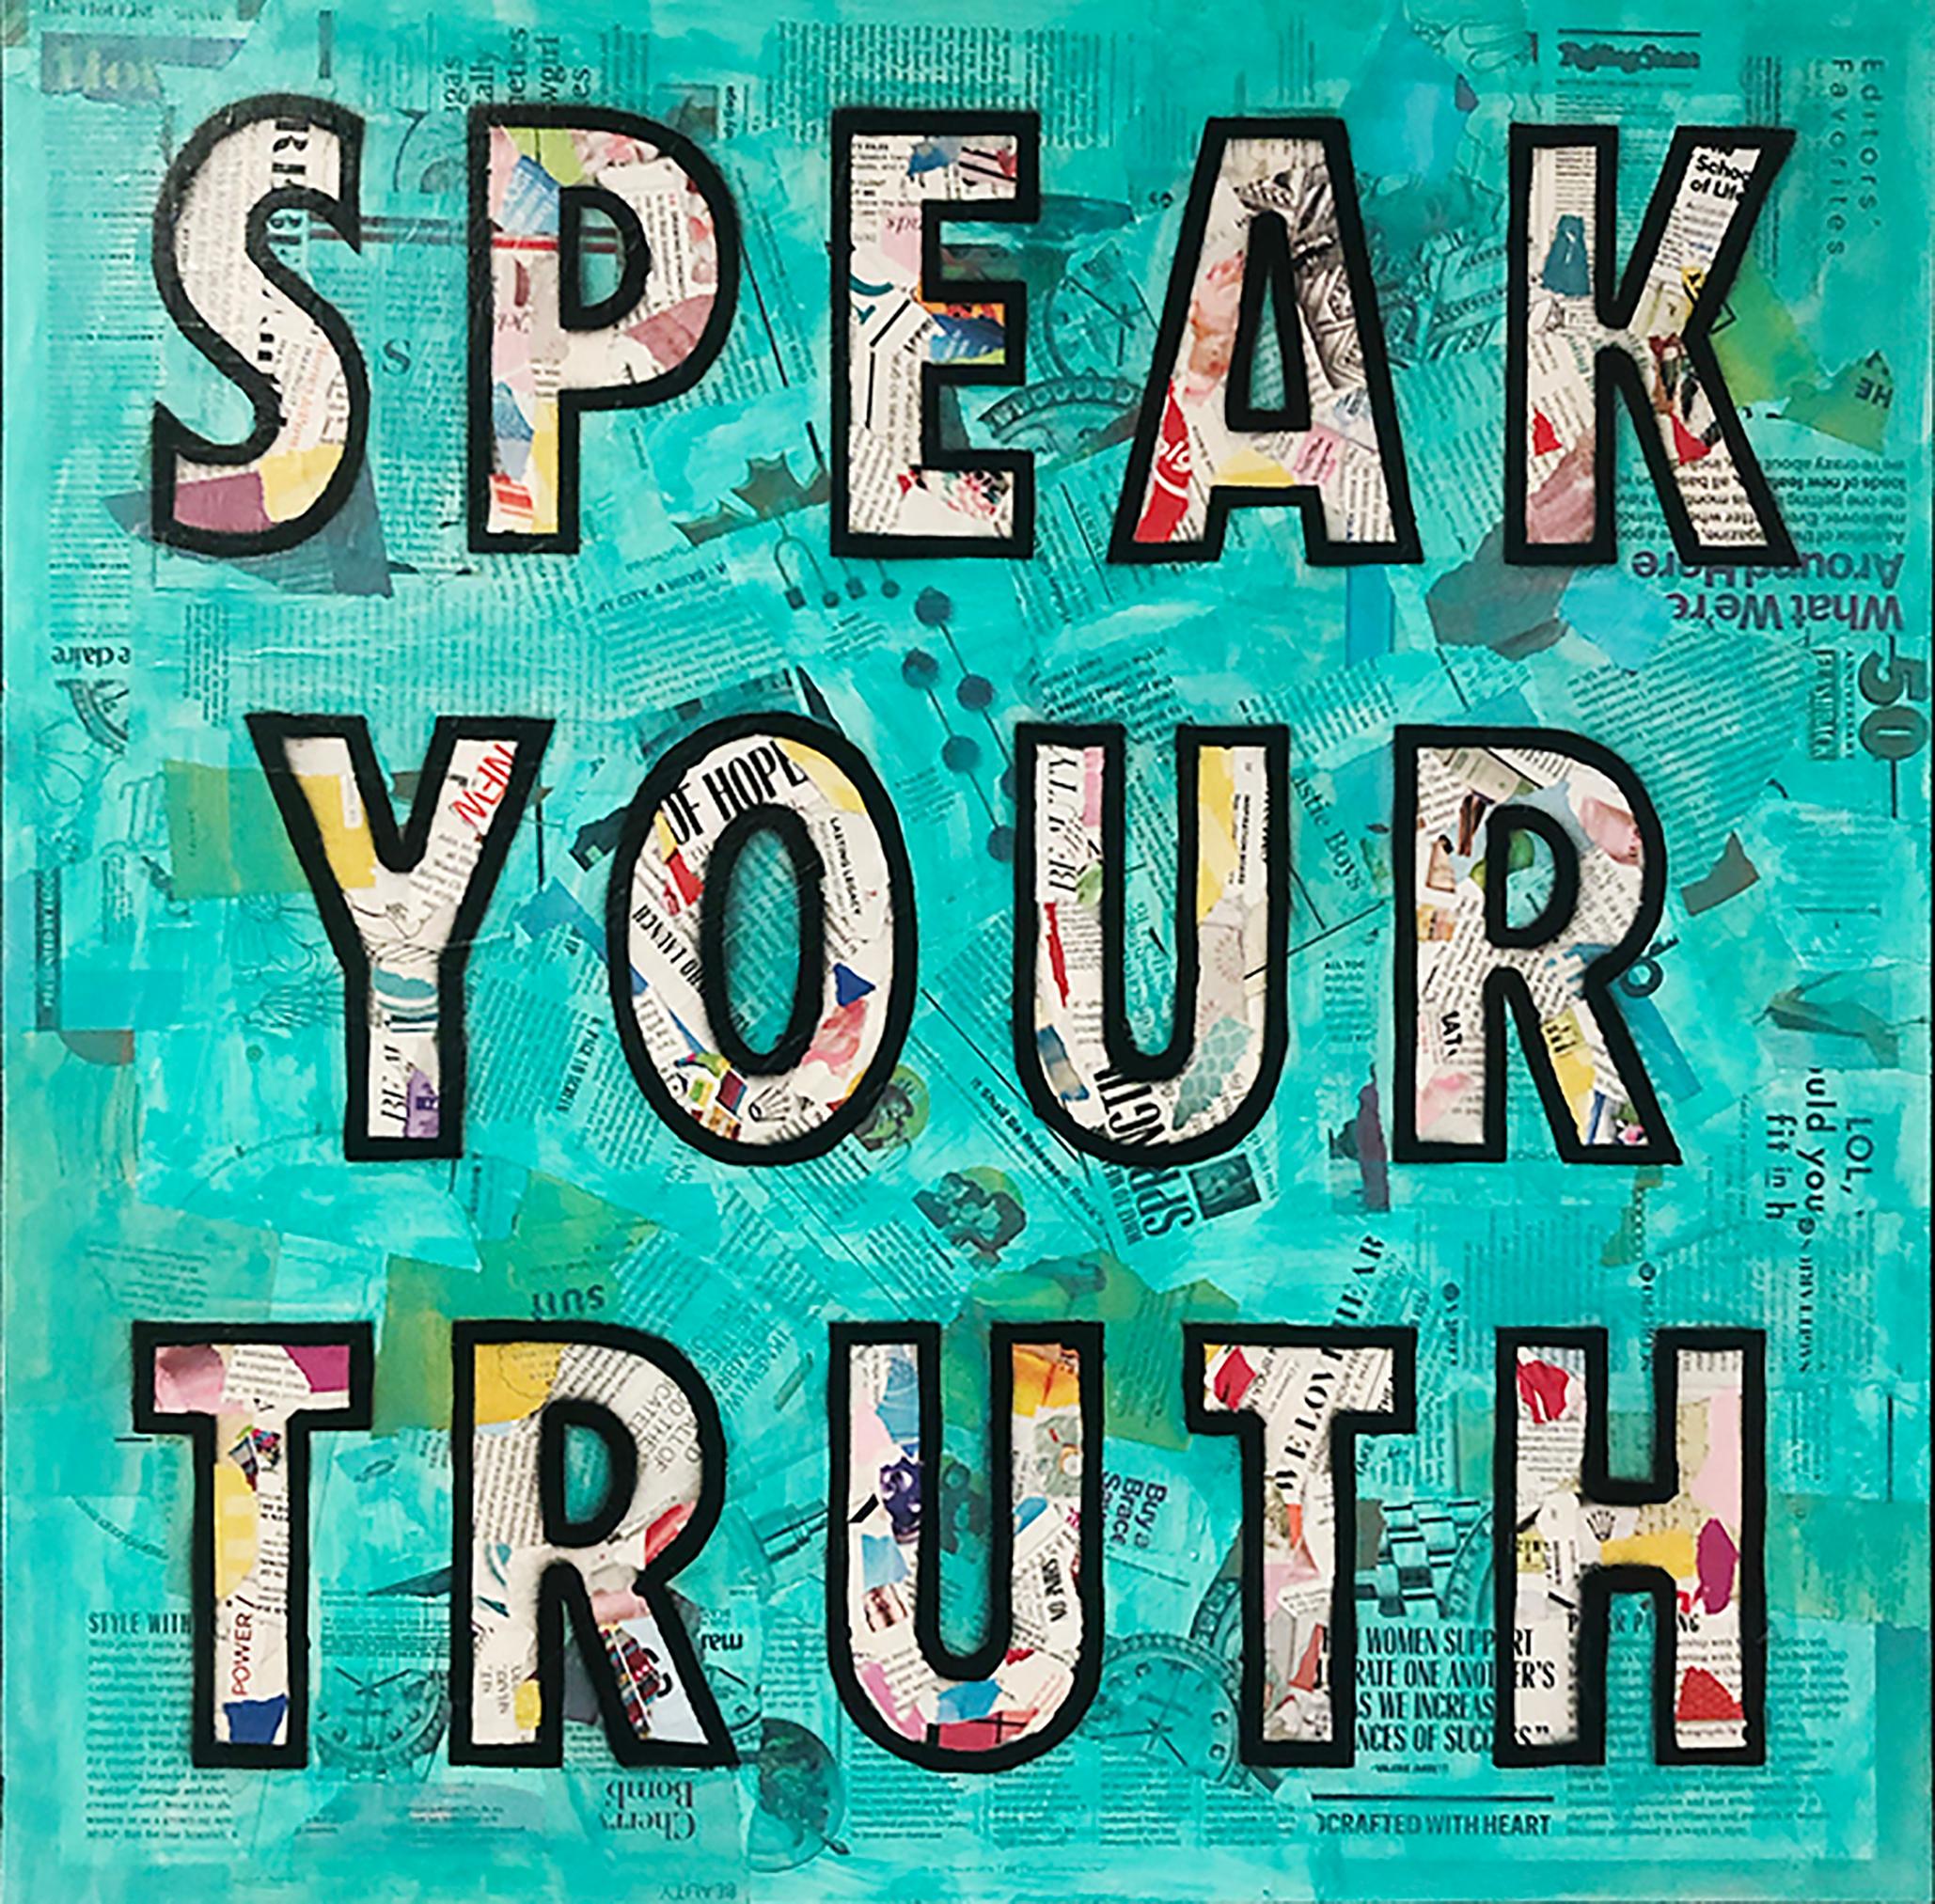 Speak Your Truth - Mixed Media Collage Teal + Black + White - Mixed Media Art by Amy Smith